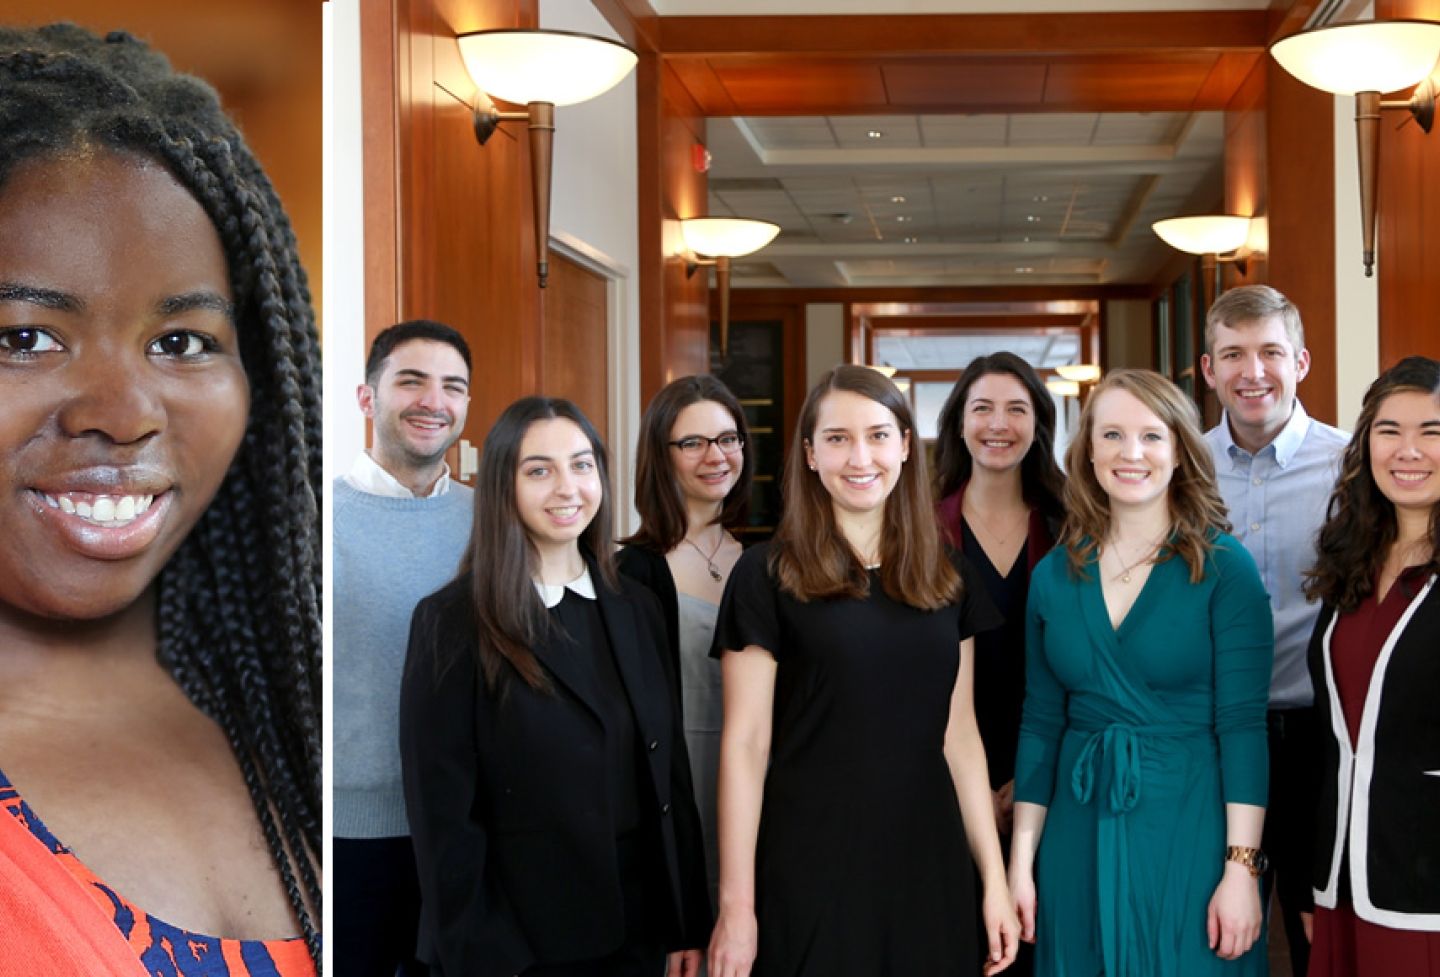 Jasmine Lee ’20 was elected president of the Student Bar Association. Laura Toulme ’20 was named editor-in-chief of the Virginia Law Review.